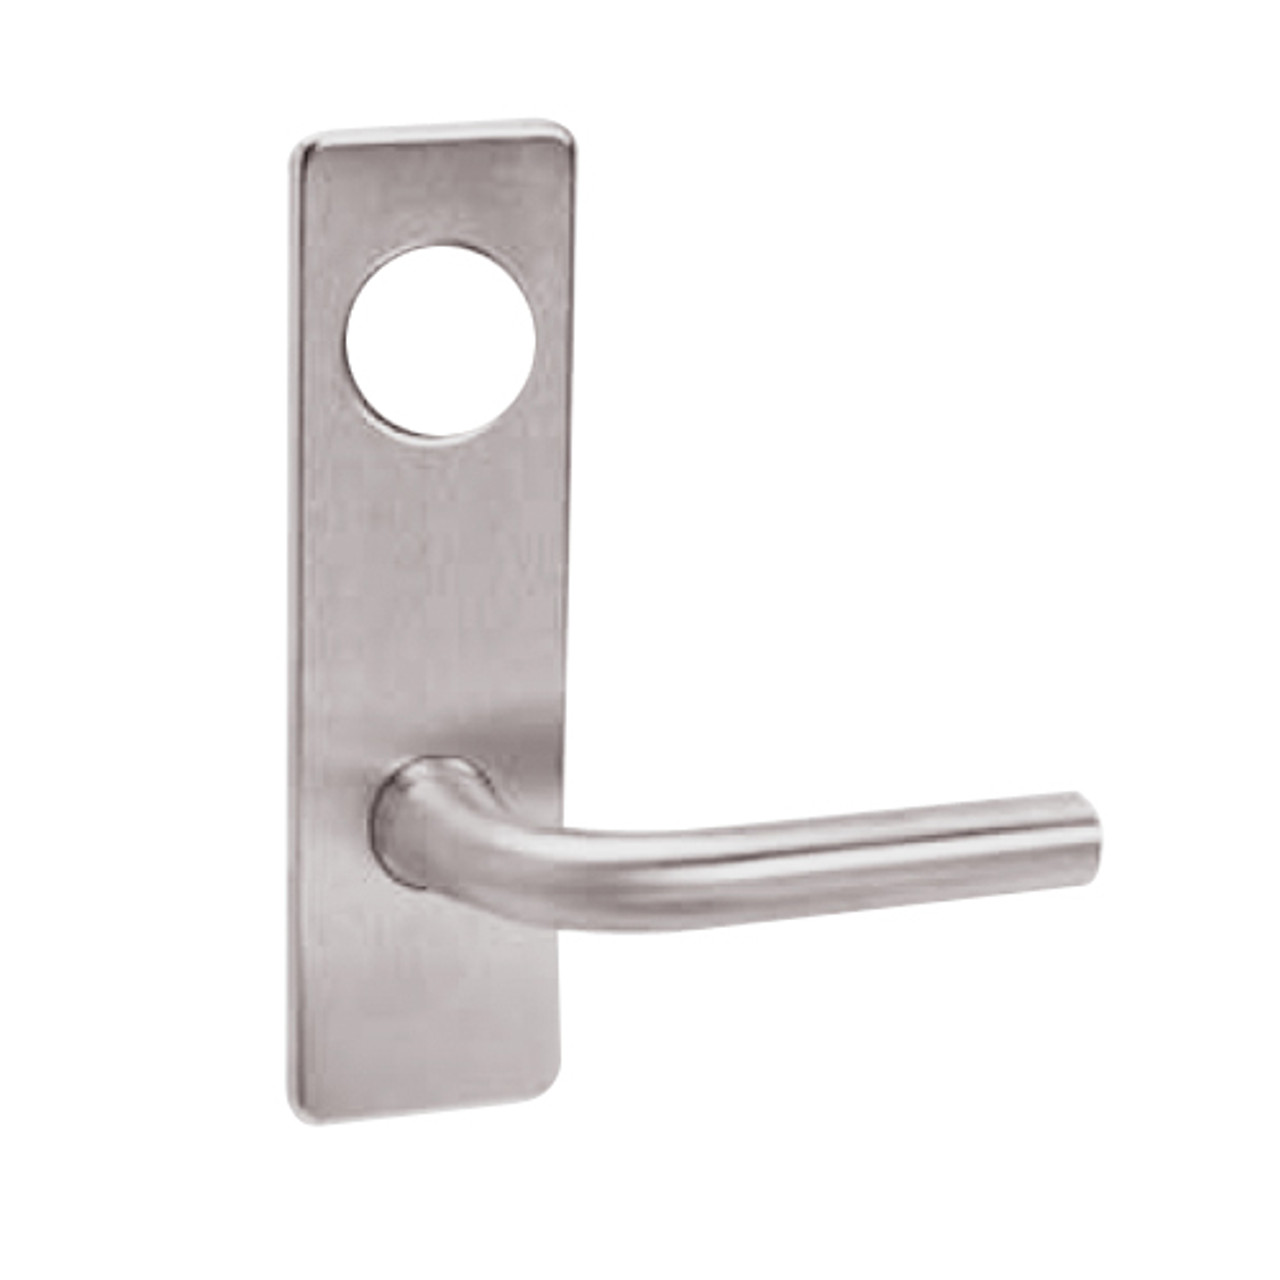 ML2065-RSP-630-CL6 Corbin Russwin ML2000 Series IC 6-Pin Less Core Mortise Dormitory Locksets with Regis Lever in Satin Stainless